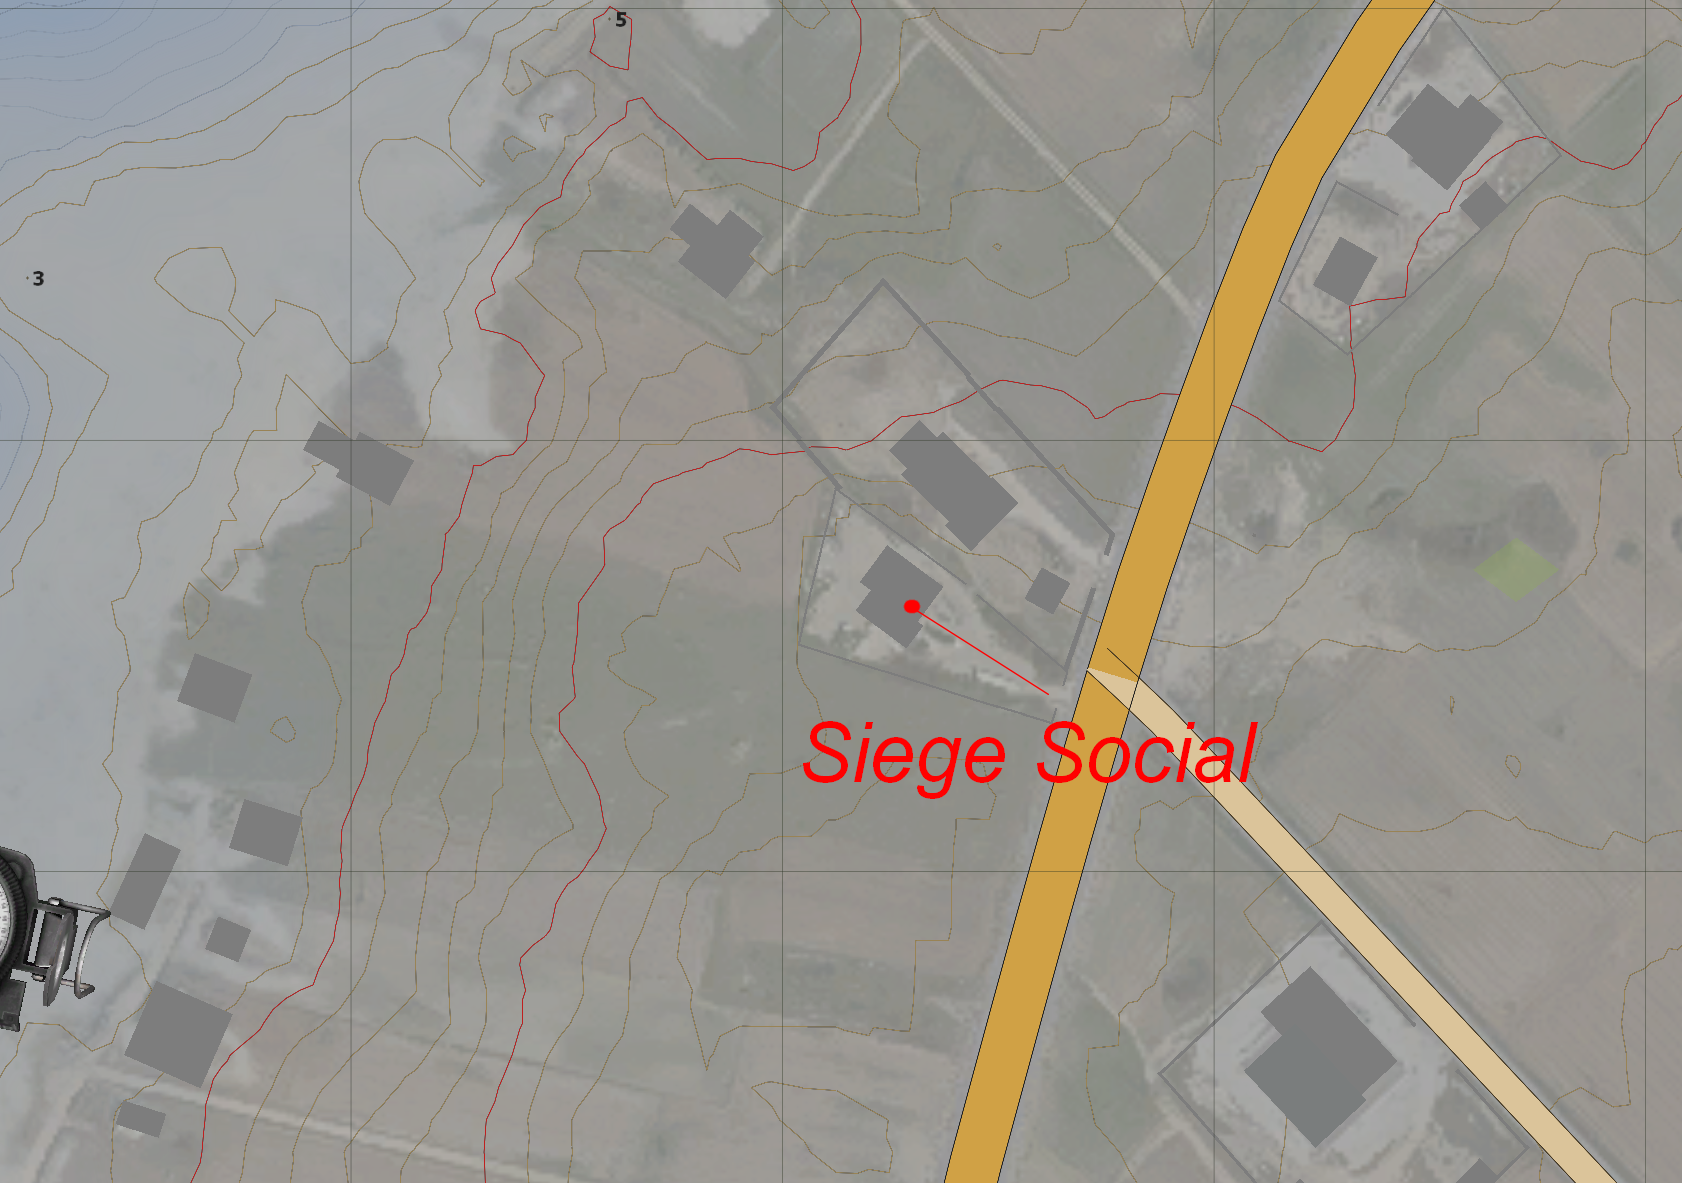 Siegesocial3.png